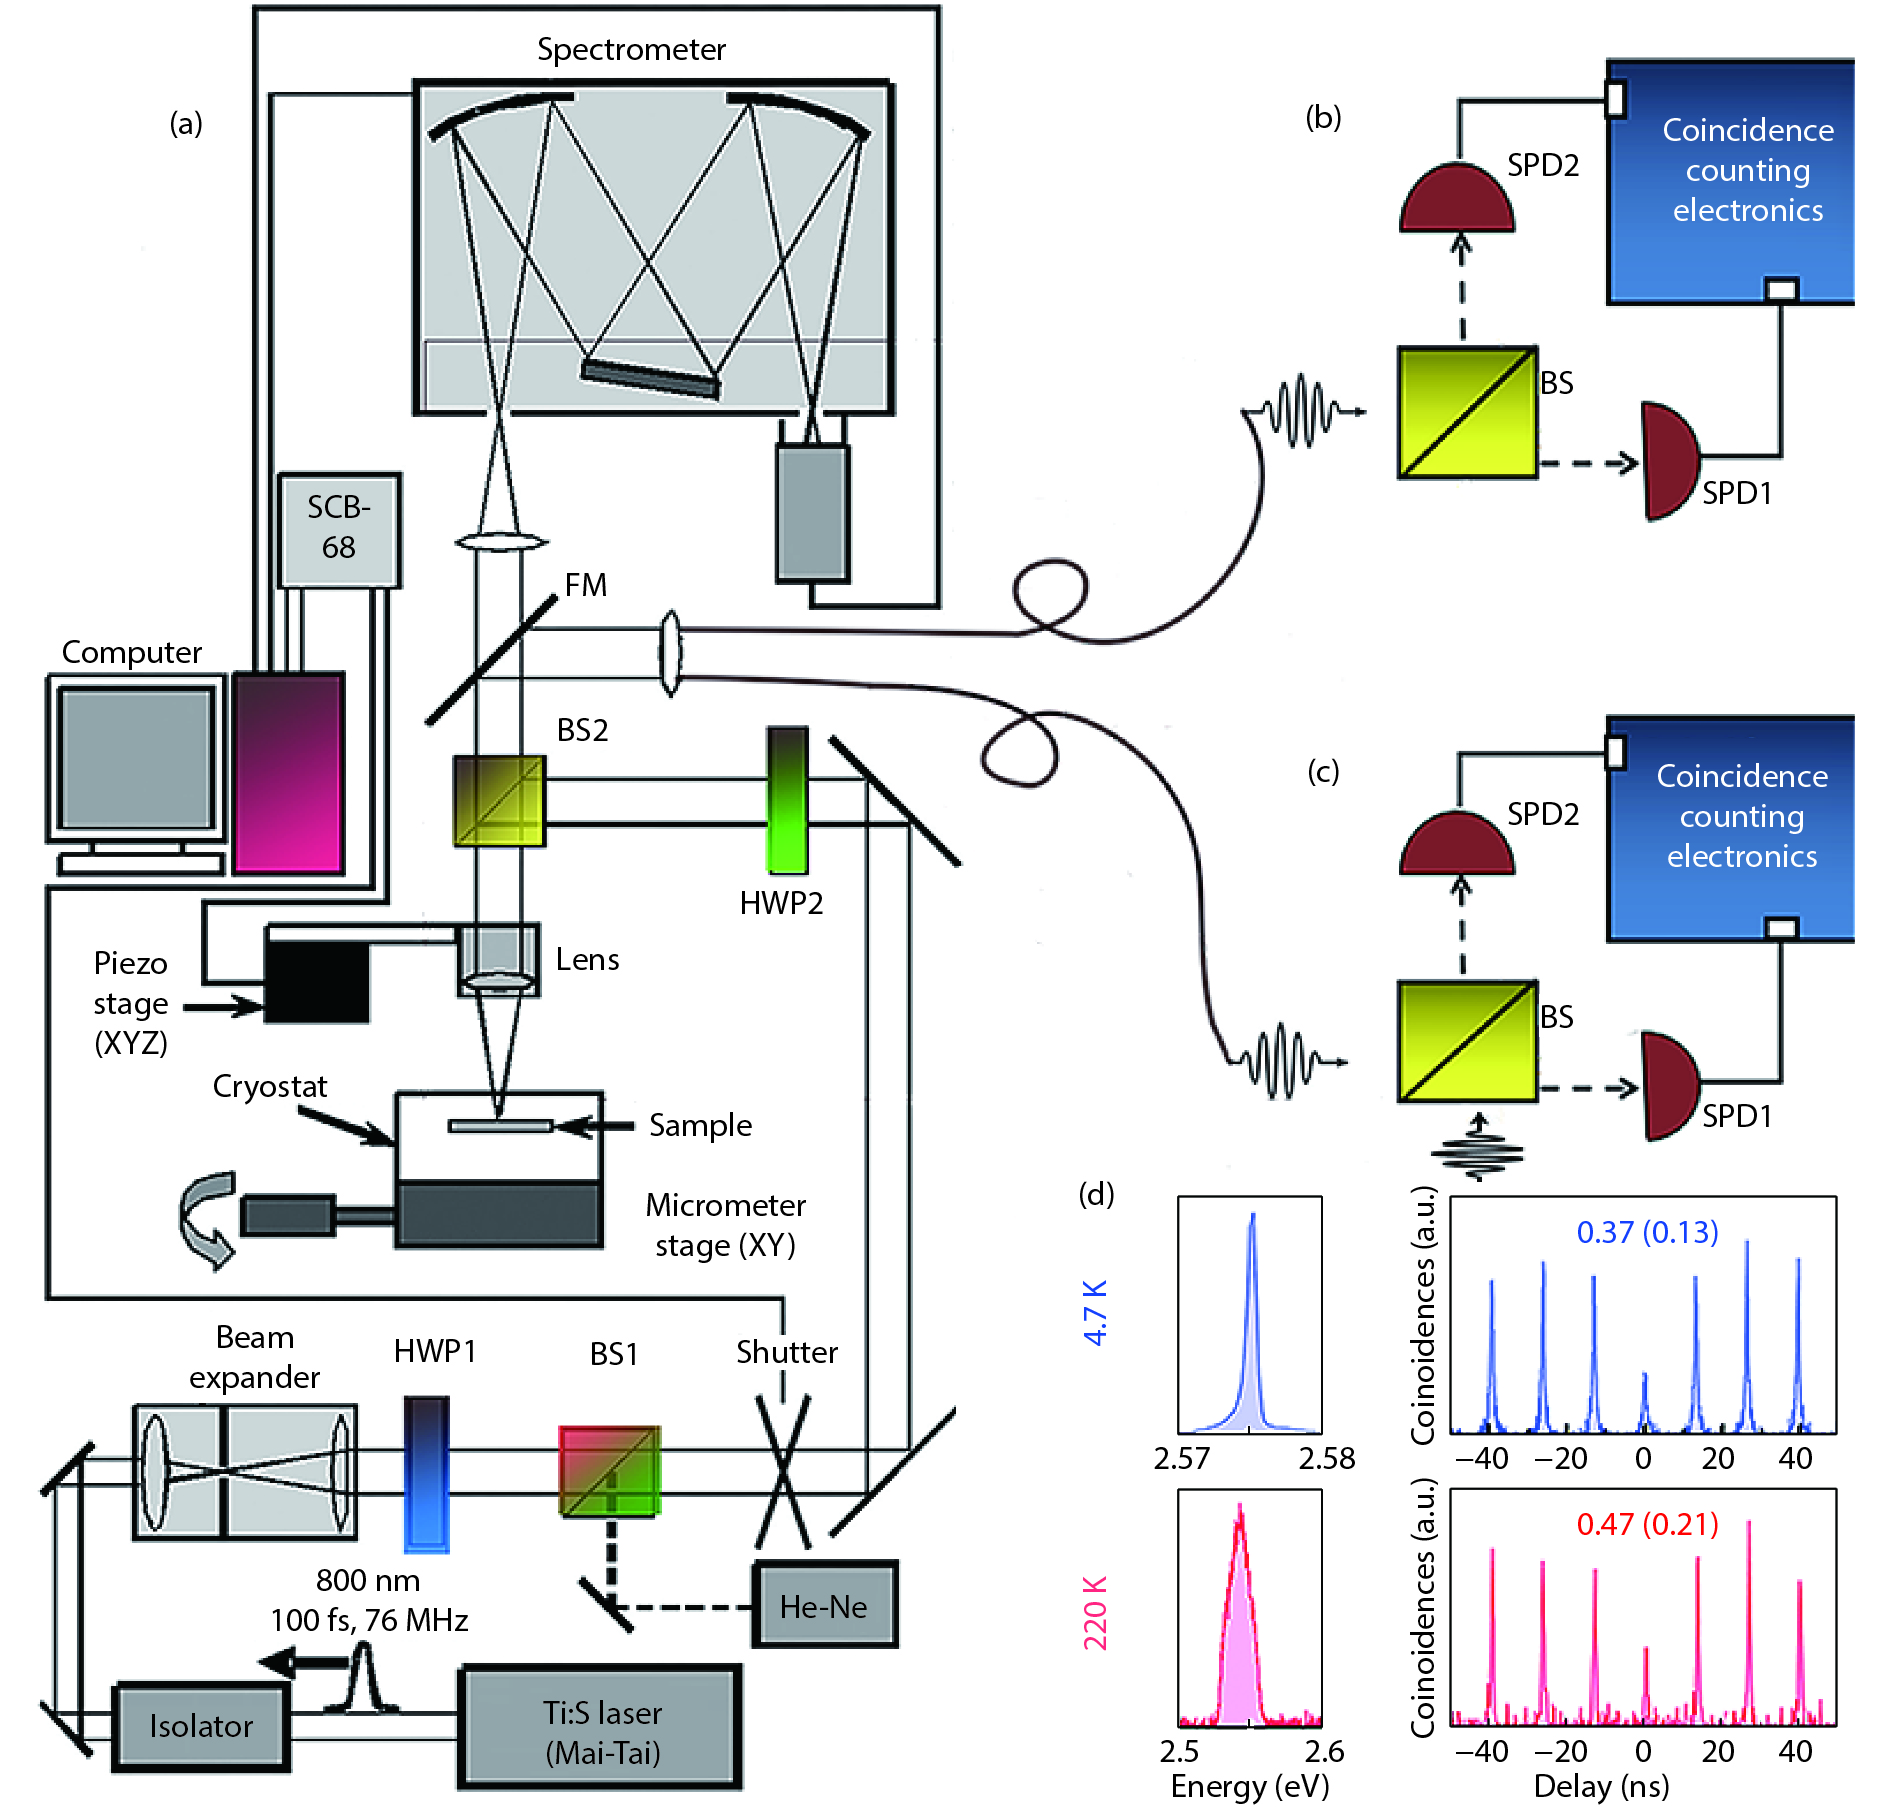 (Color online) (a) Schematic diagram of the system used to perform general QDs micro-photoluminescence spectroscopy. (b) HBT experiment set-up. (c) HOM experiment set-up. (d) Examples of HBT experiment, reproduced from Ref. [39].